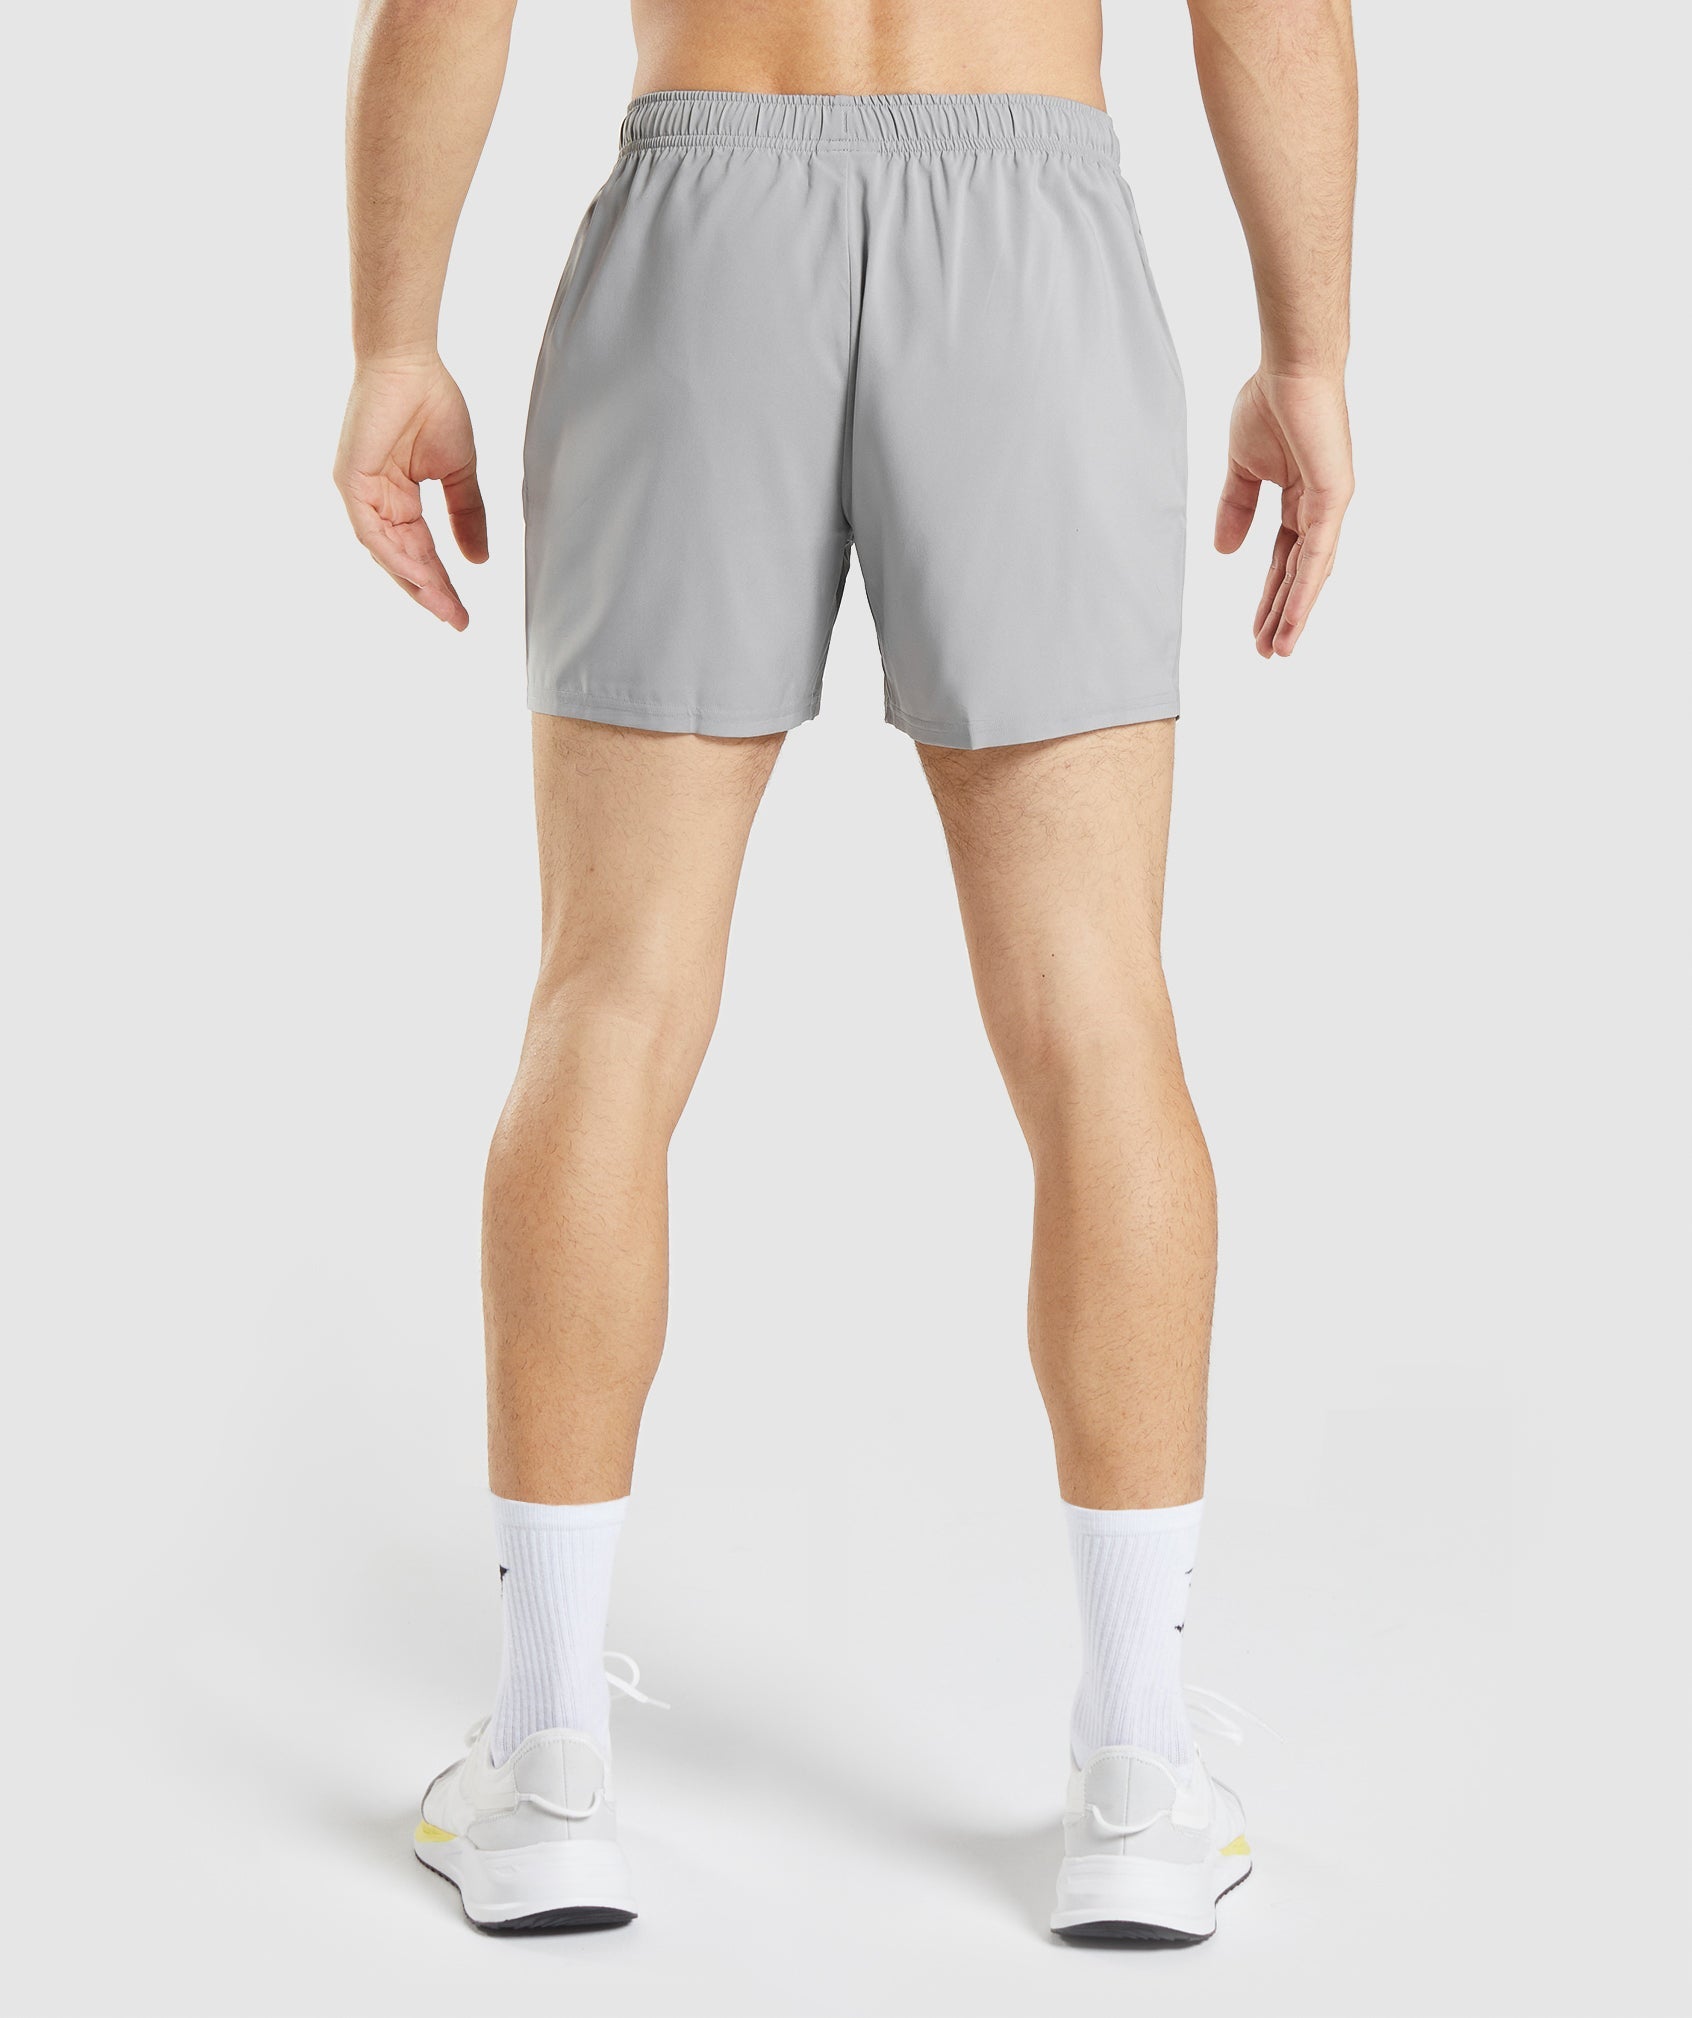 Arrival 5" Shorts in Smokey Grey - view 2